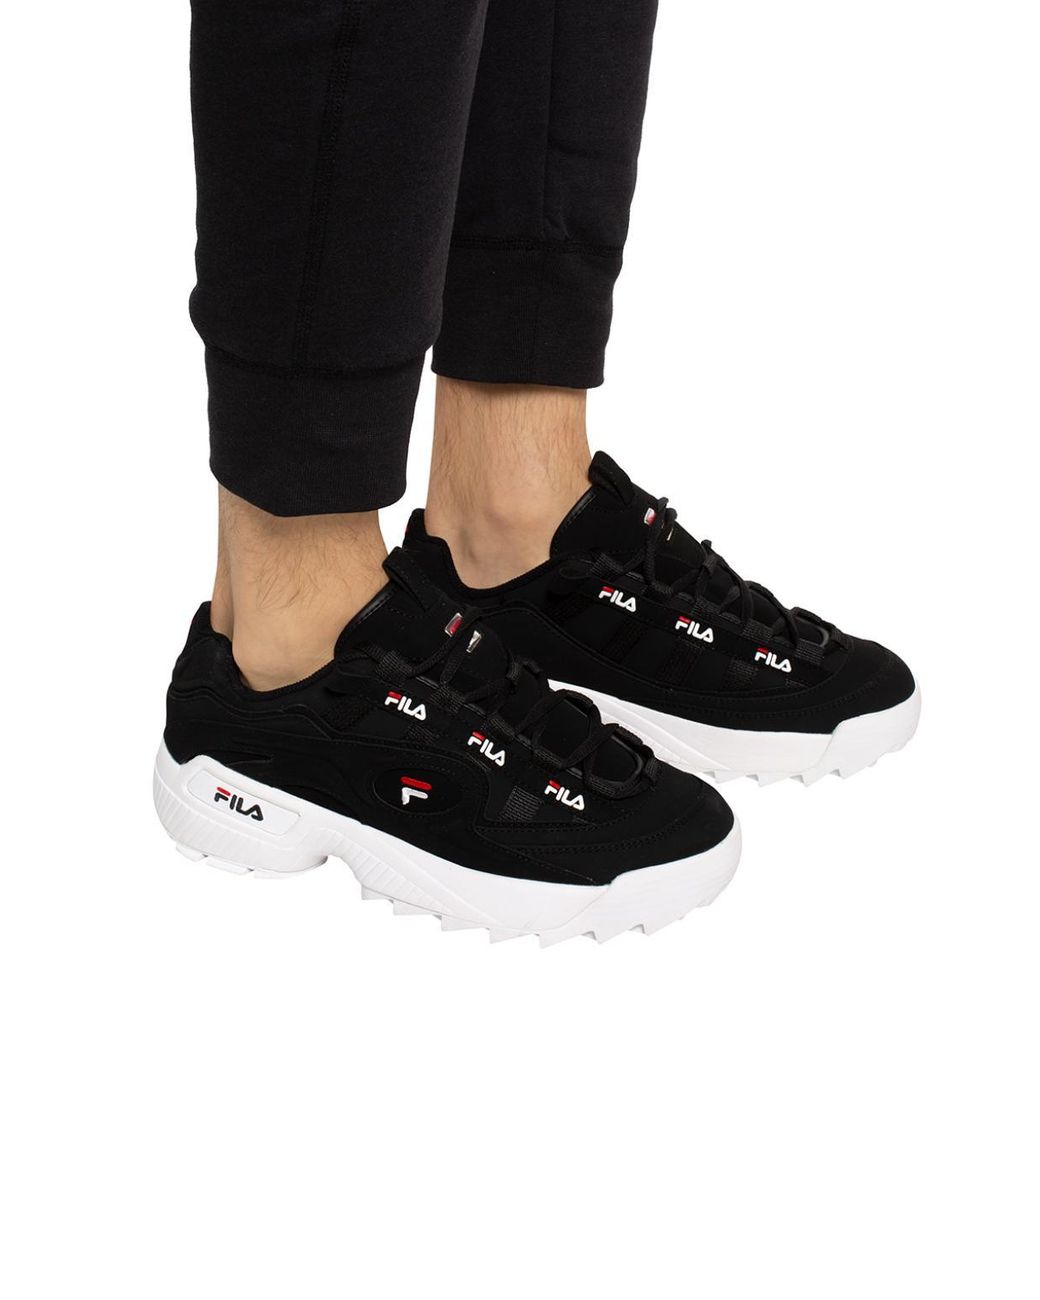 Fila Leather 'd-formation' Sport Shoes 